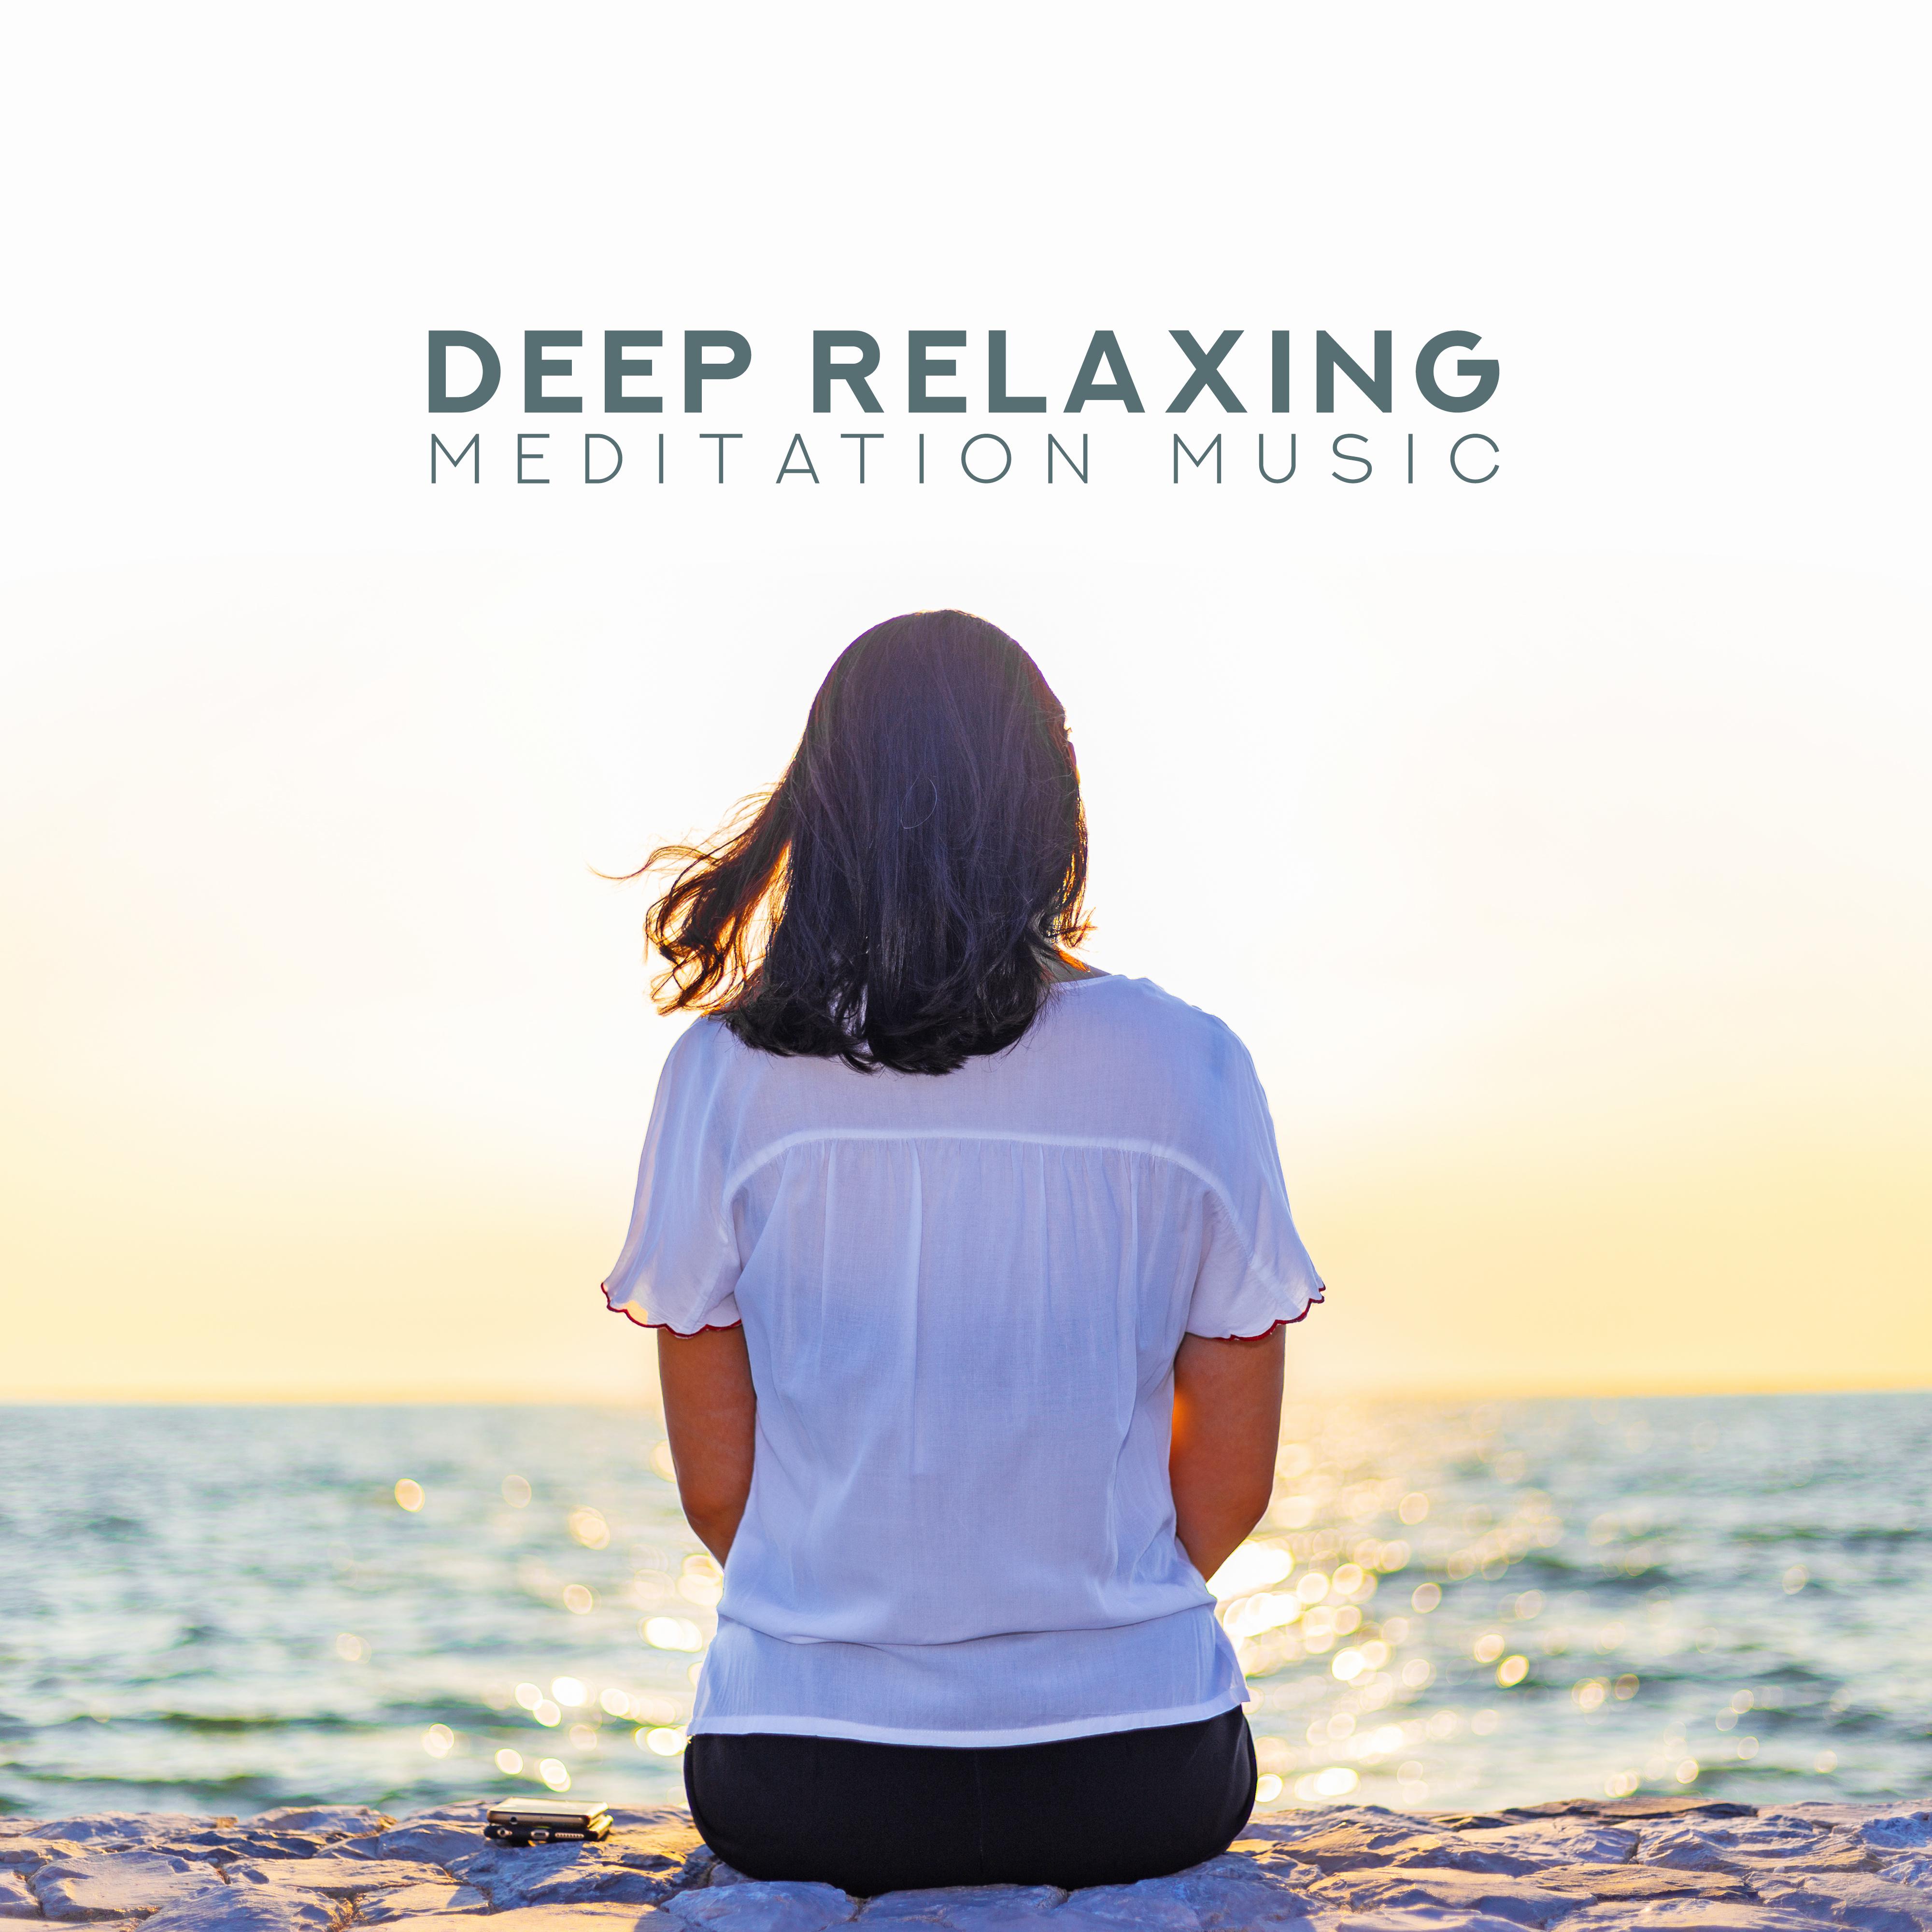 Deep Relaxing Meditation Music – Meditation Music Zone, Pure Therapy, Ambient Yoga, Deep Harmony, Music for Mind, Yoga Meditation